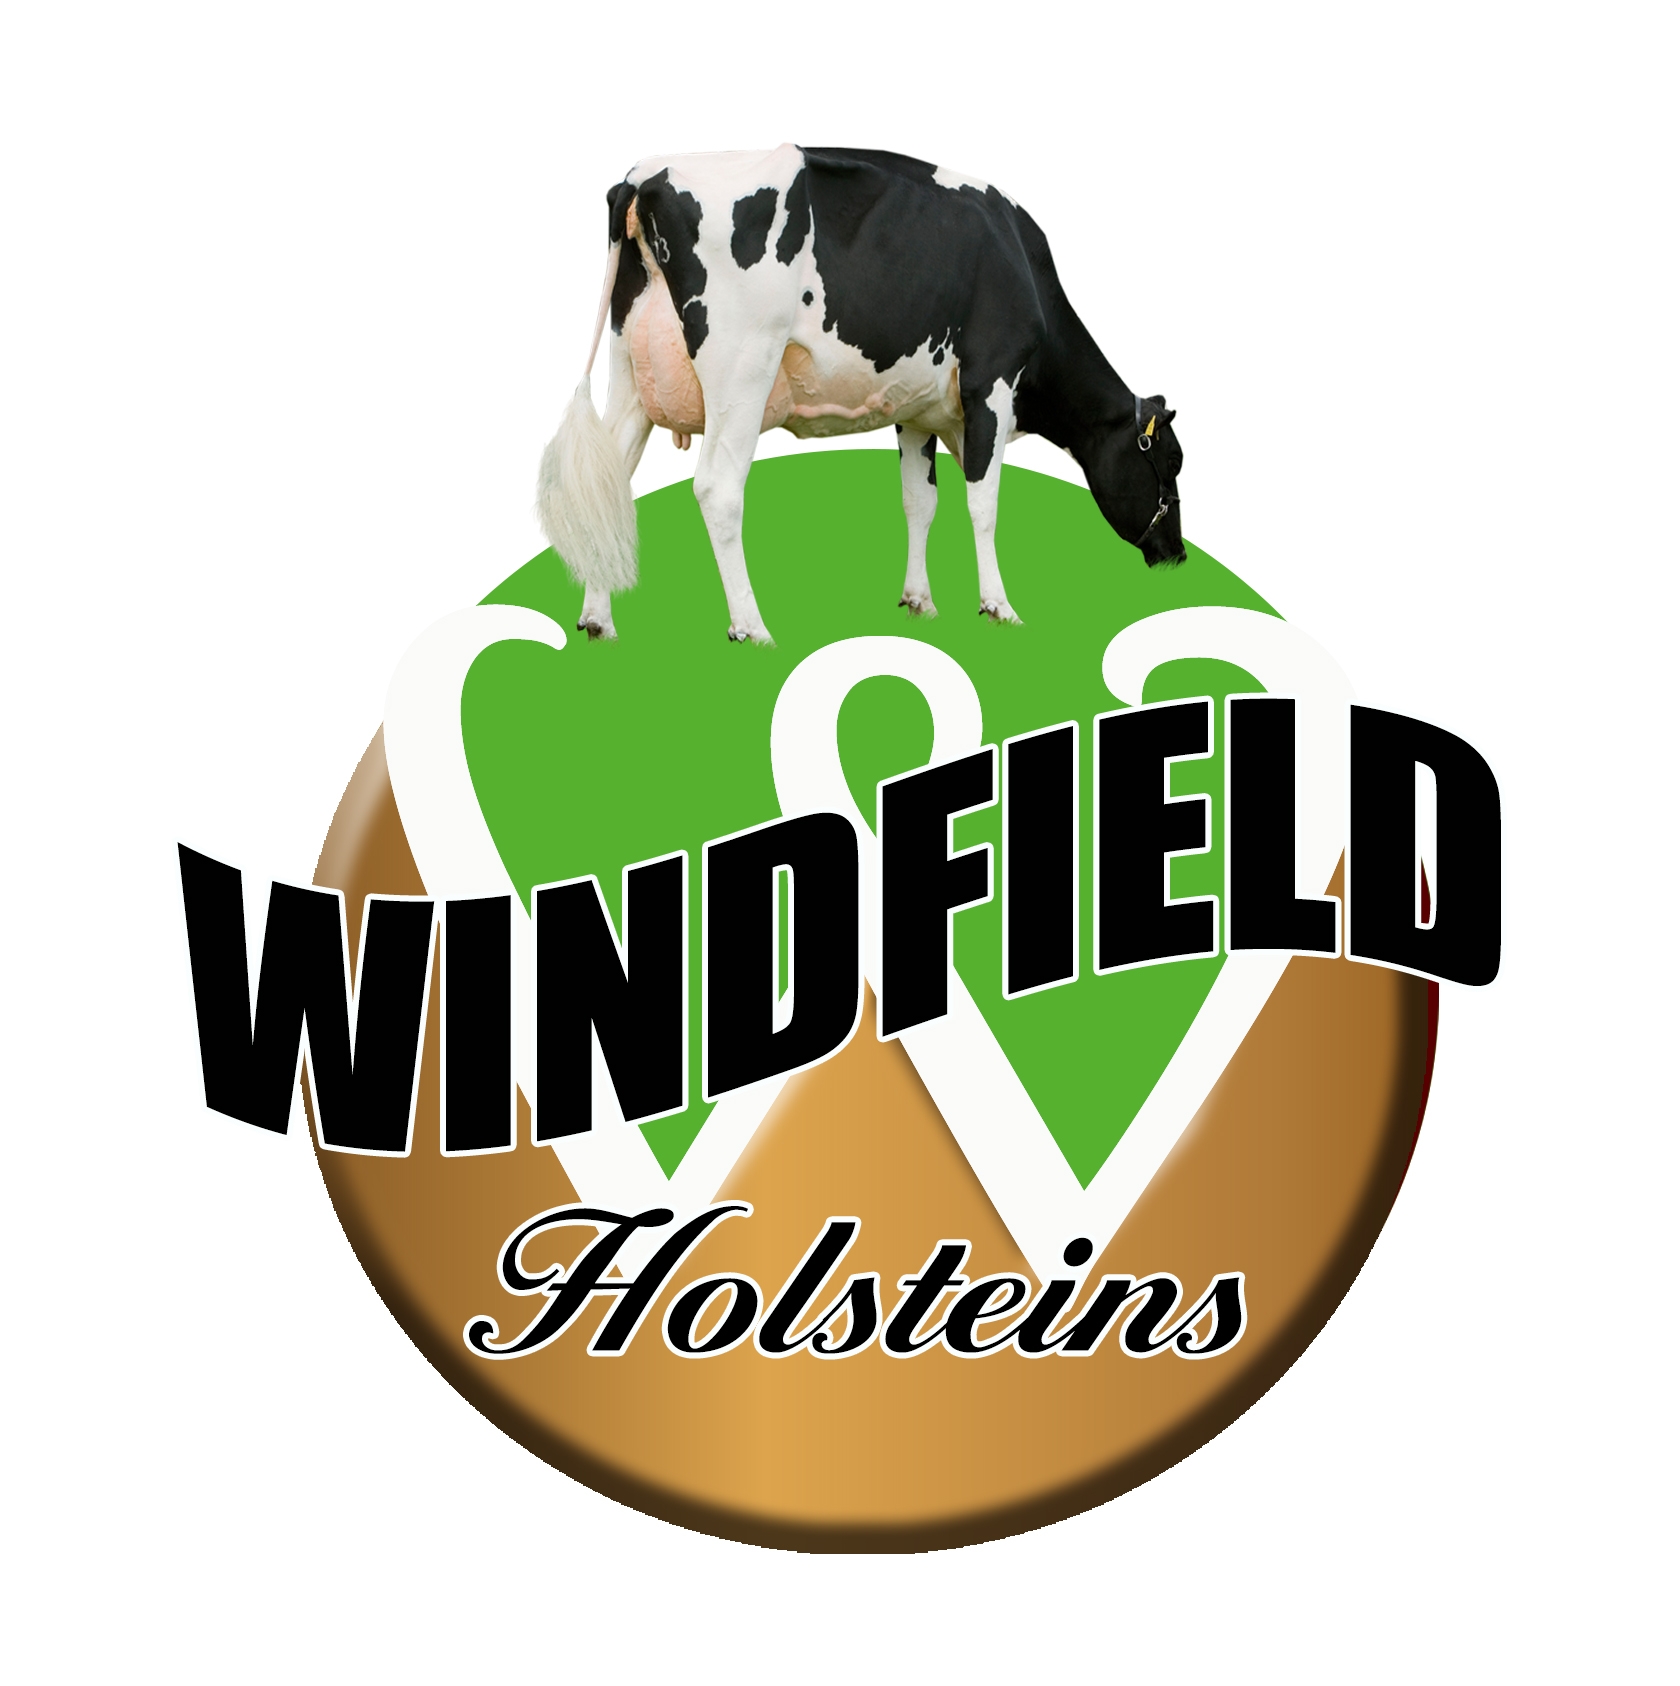 products-windfield_holsteins_logo_final